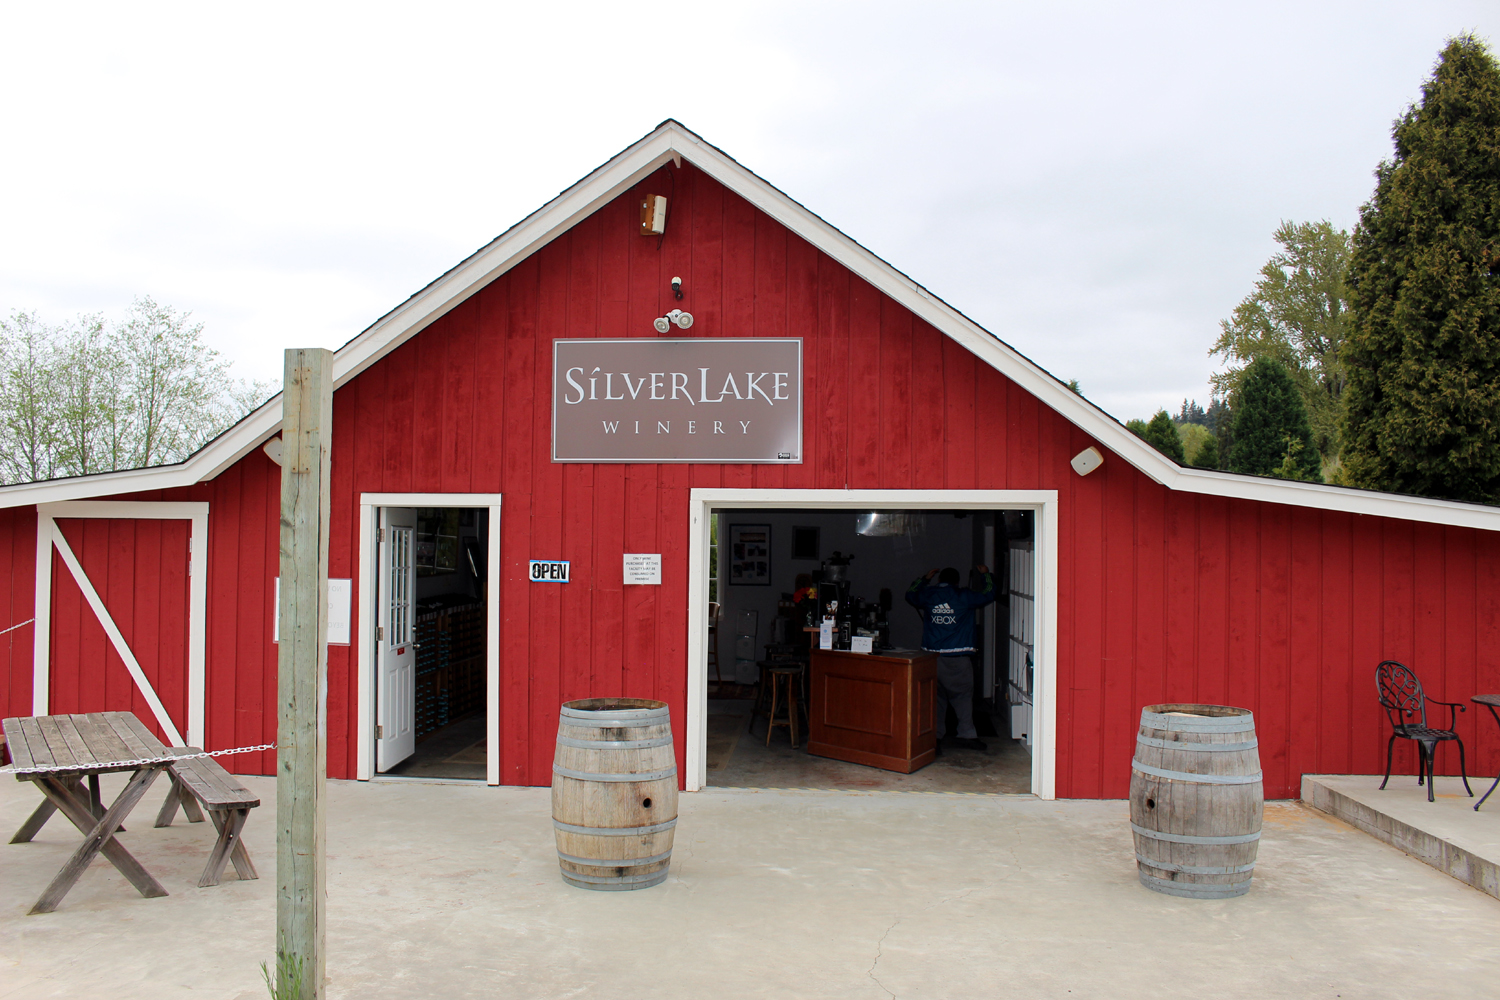 Home - Silver Thread Winery